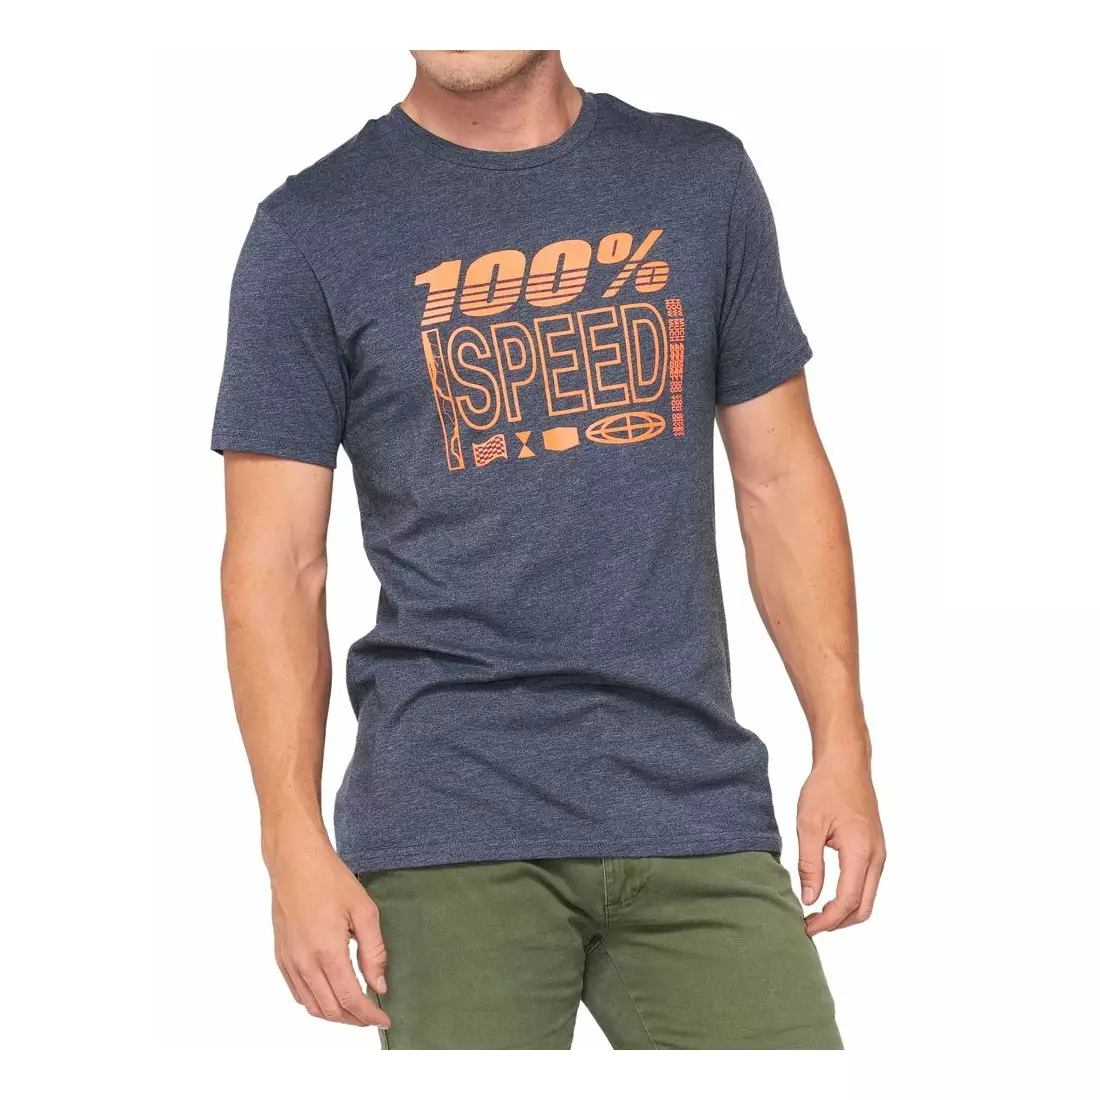 100% men's sports t-shirt with short sleeves TRADEMARK navy heather